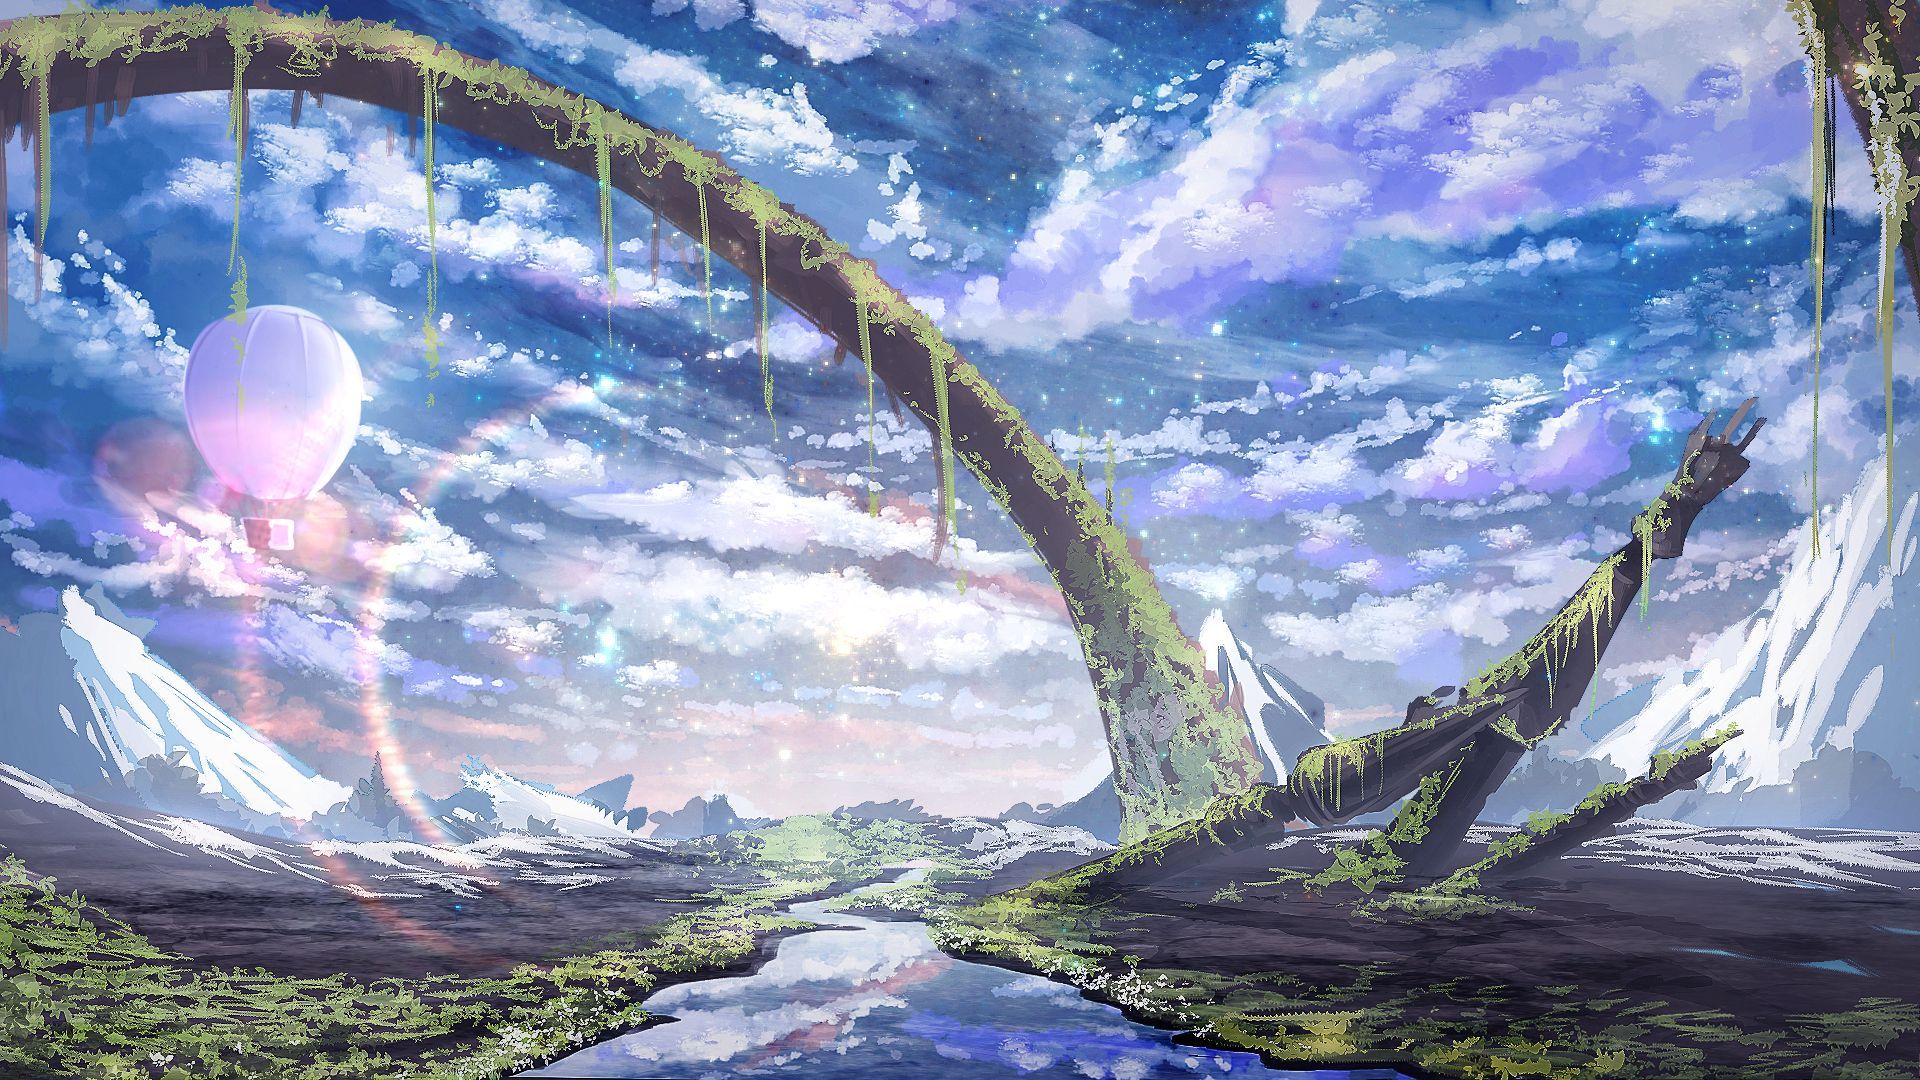 Download An Anime Drawing of a Colorful Landscape | Wallpapers.com